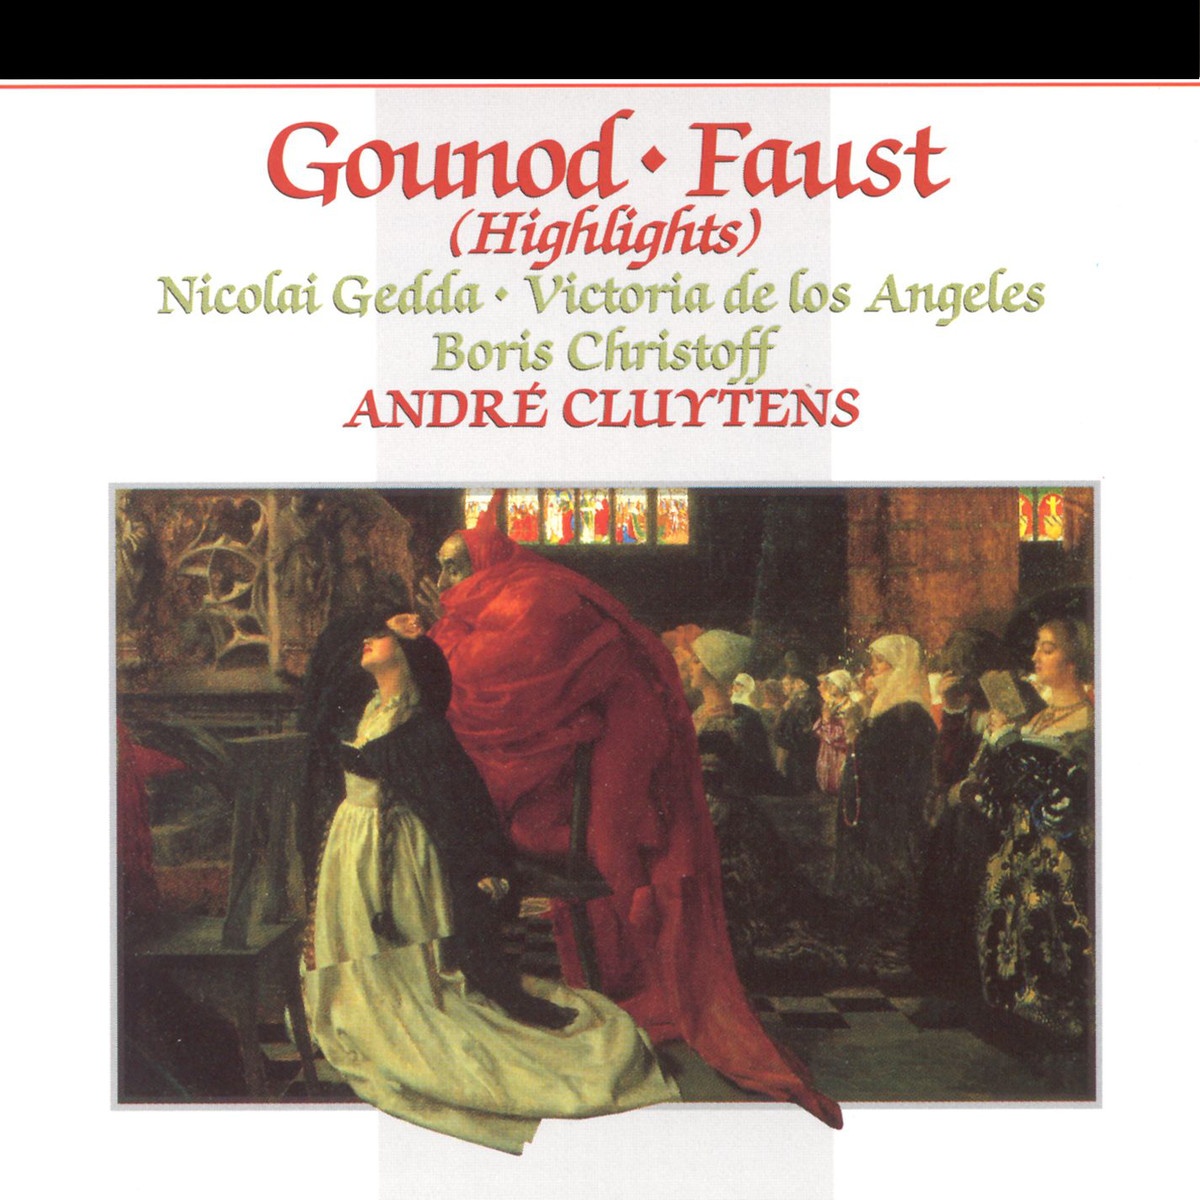 Faust - opera in five acts (1989 Digital Remaster), Act V, MUSIQUE BE BALLET: Danse antique (Allegretto)